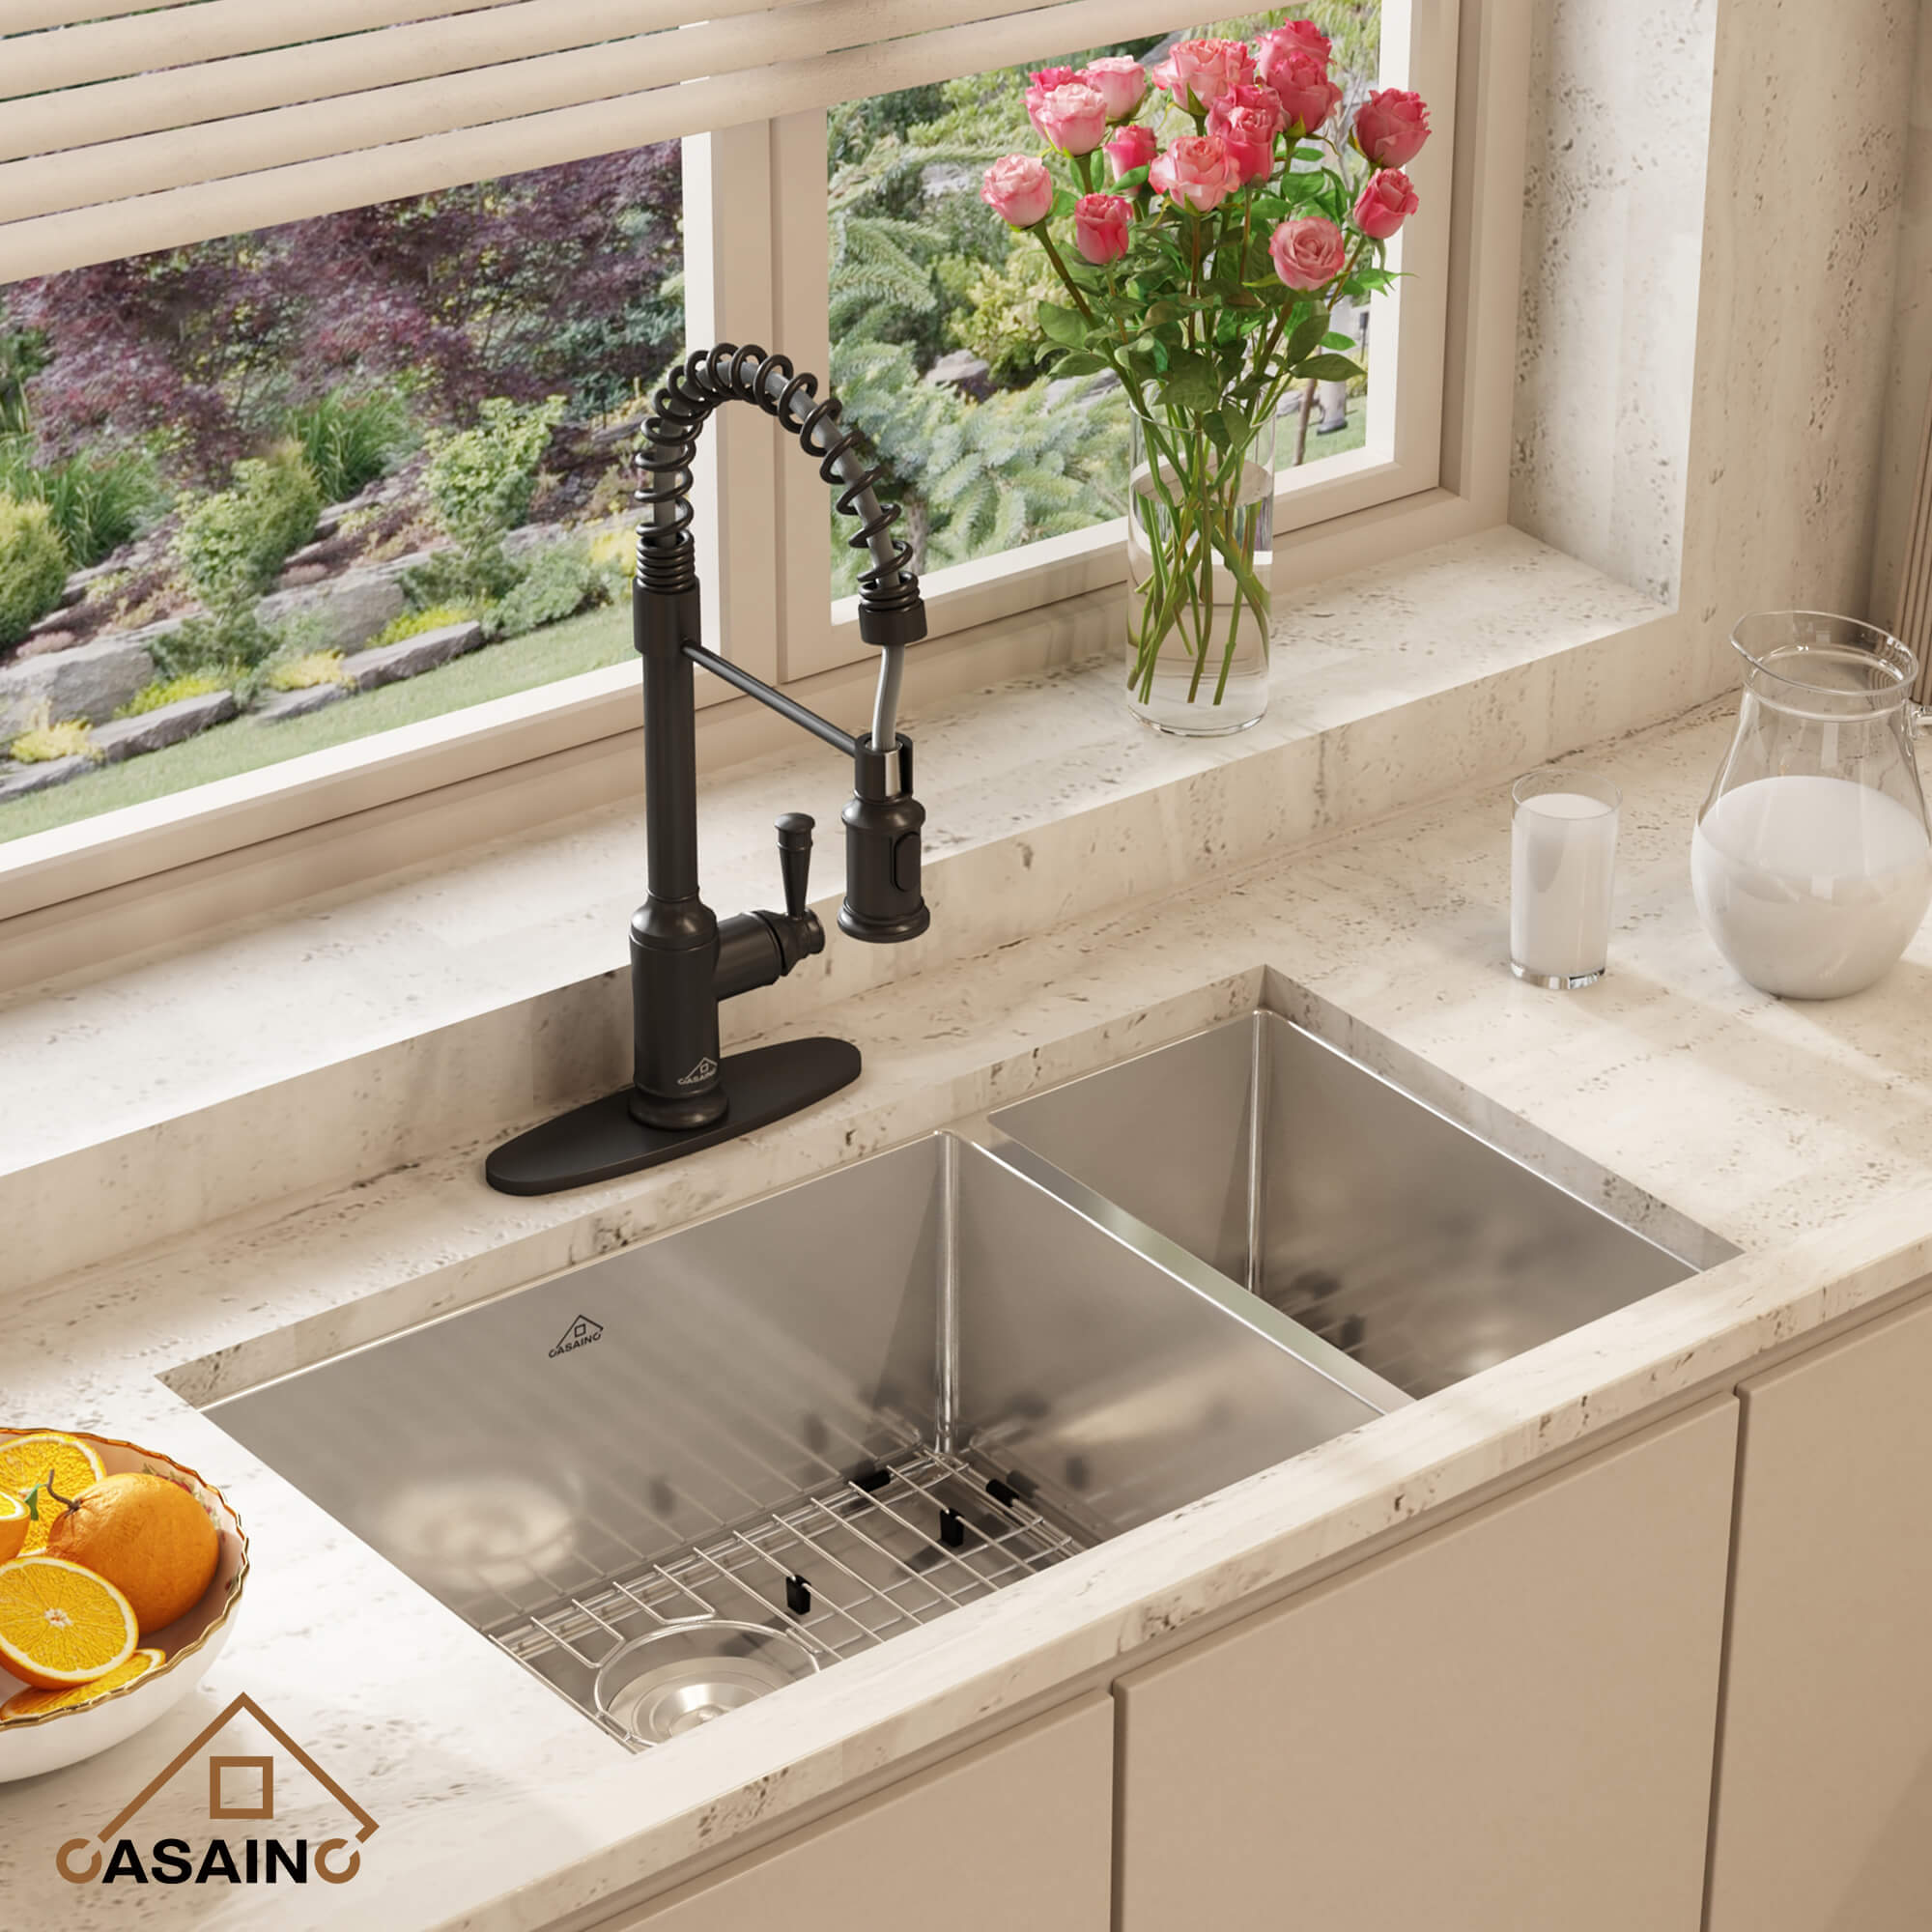 33" Golden R10 Tight Radius Stainless Steel Sink & Single-Handle Spring Pull-Out Kitchen Faucet